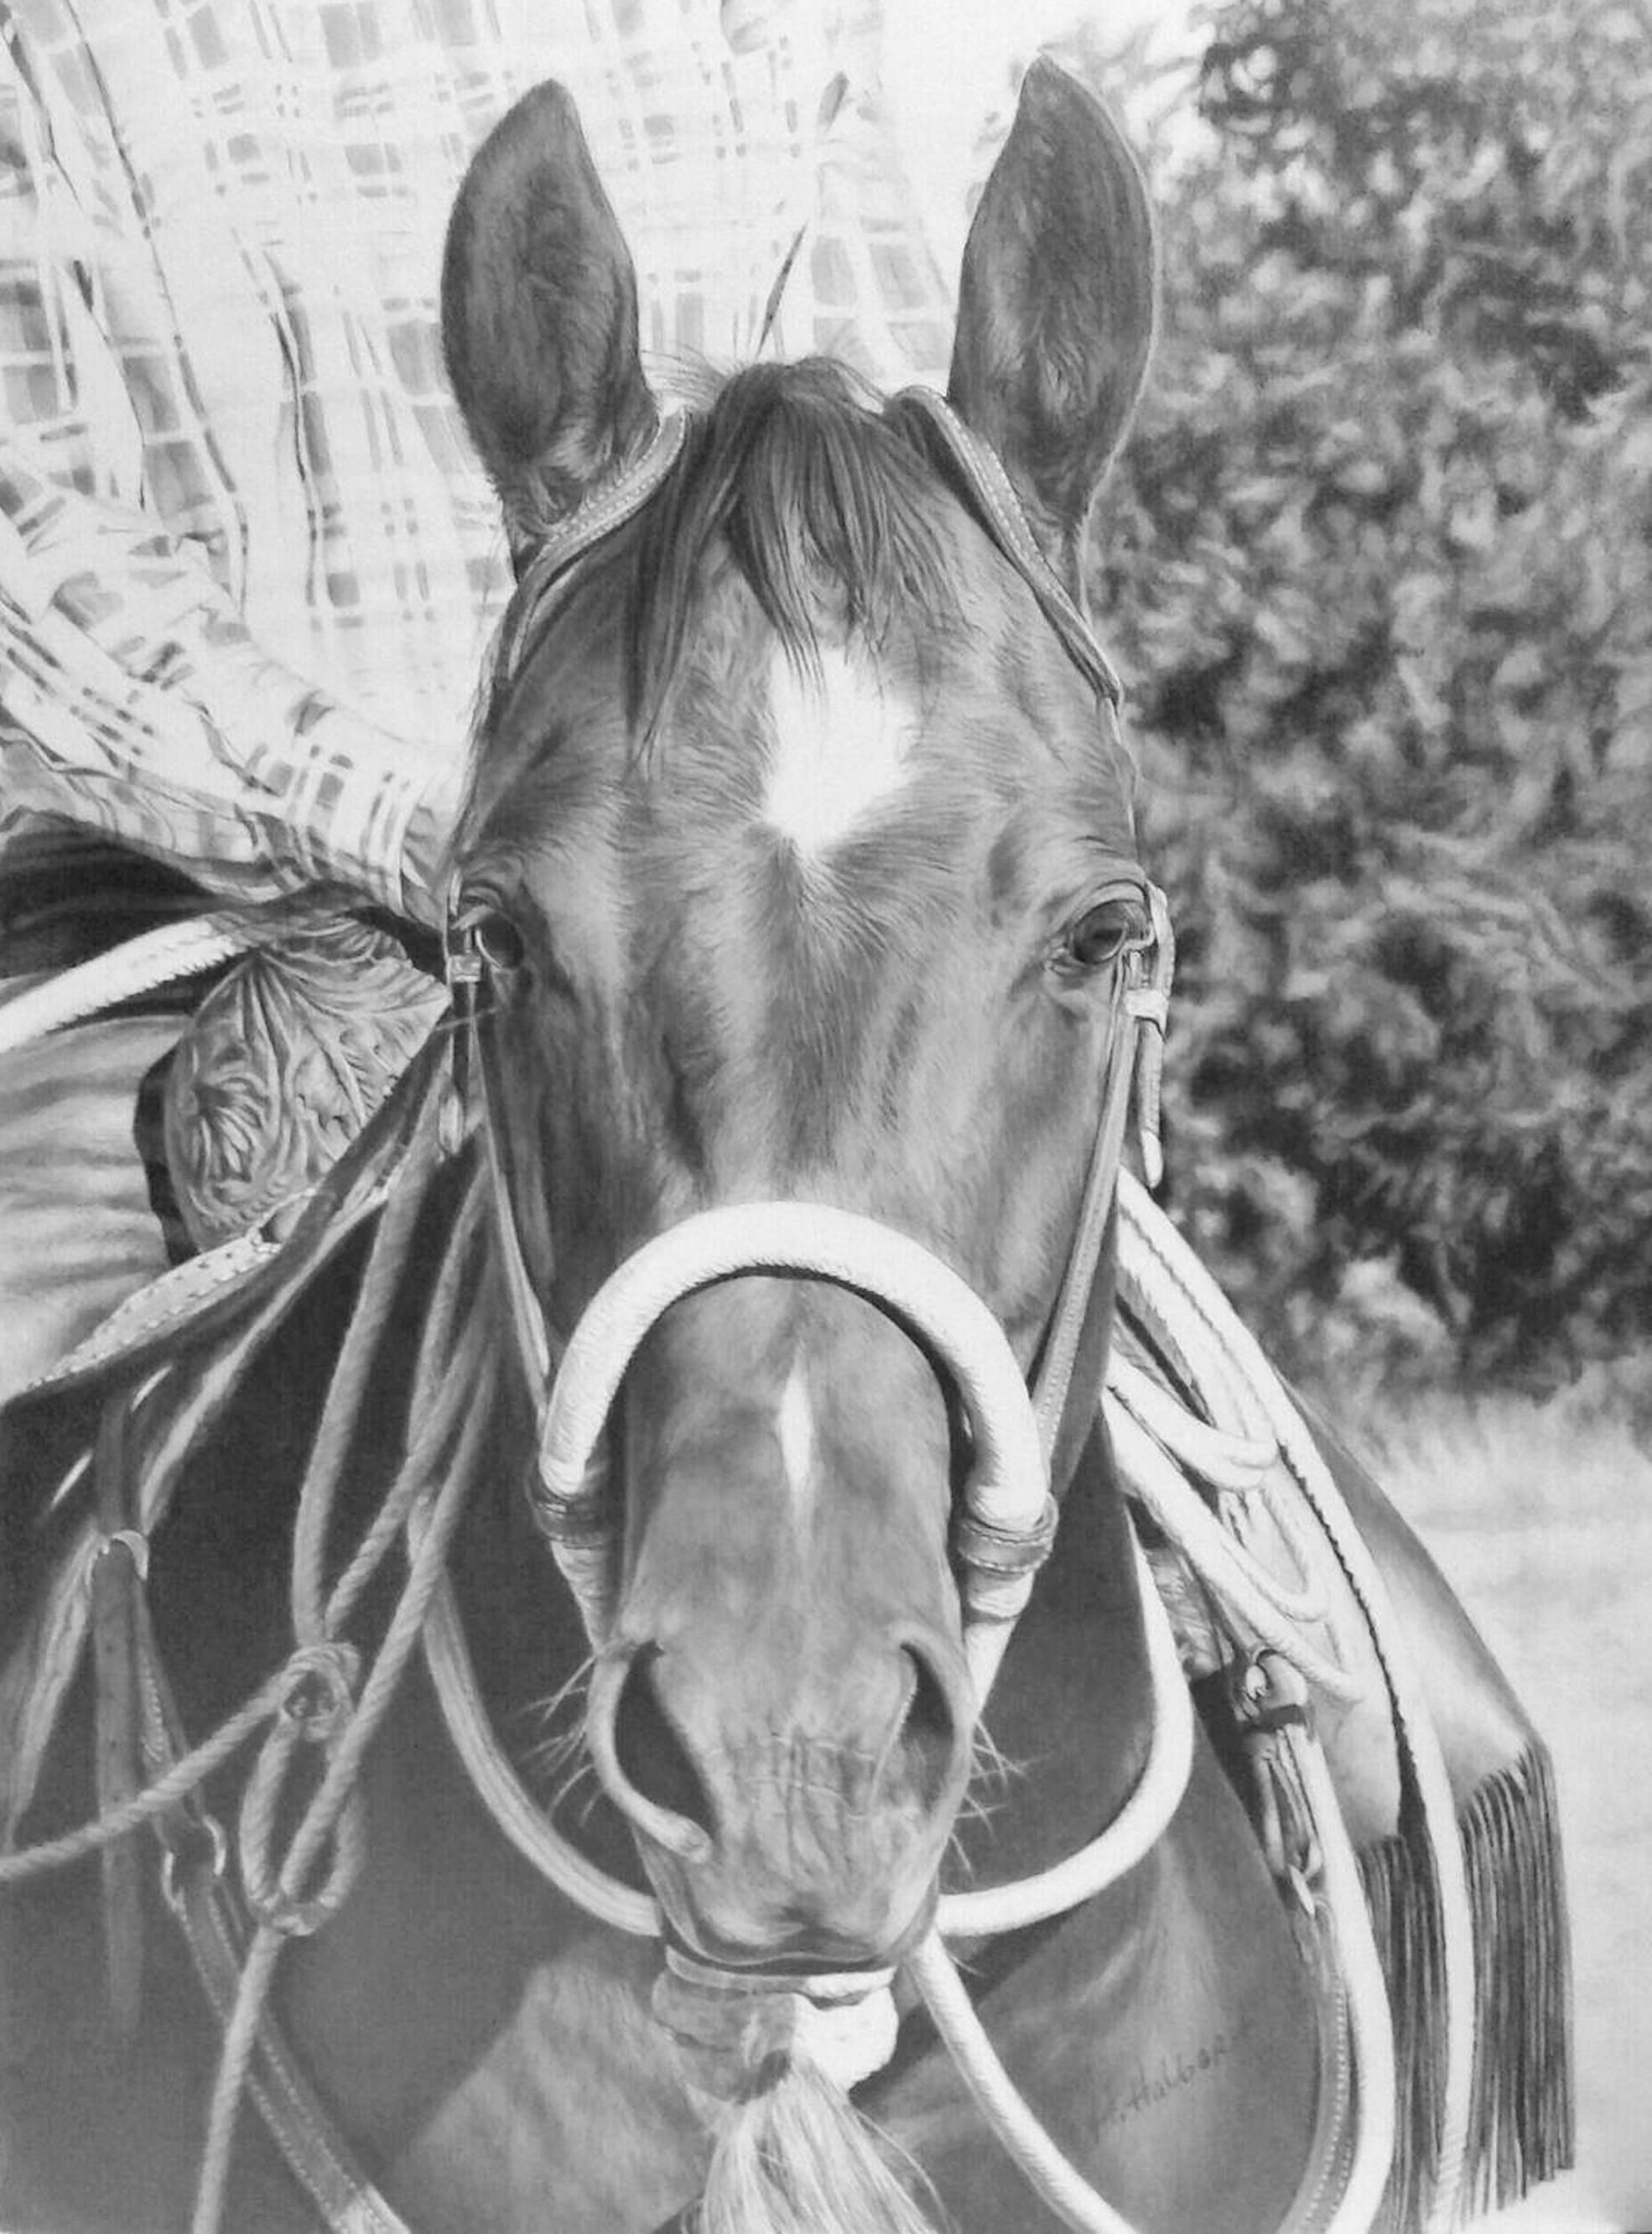 "READY AND WILLING" 16 X 12 GRAPHITE DRAWING WESTERN HORSE COWBOY